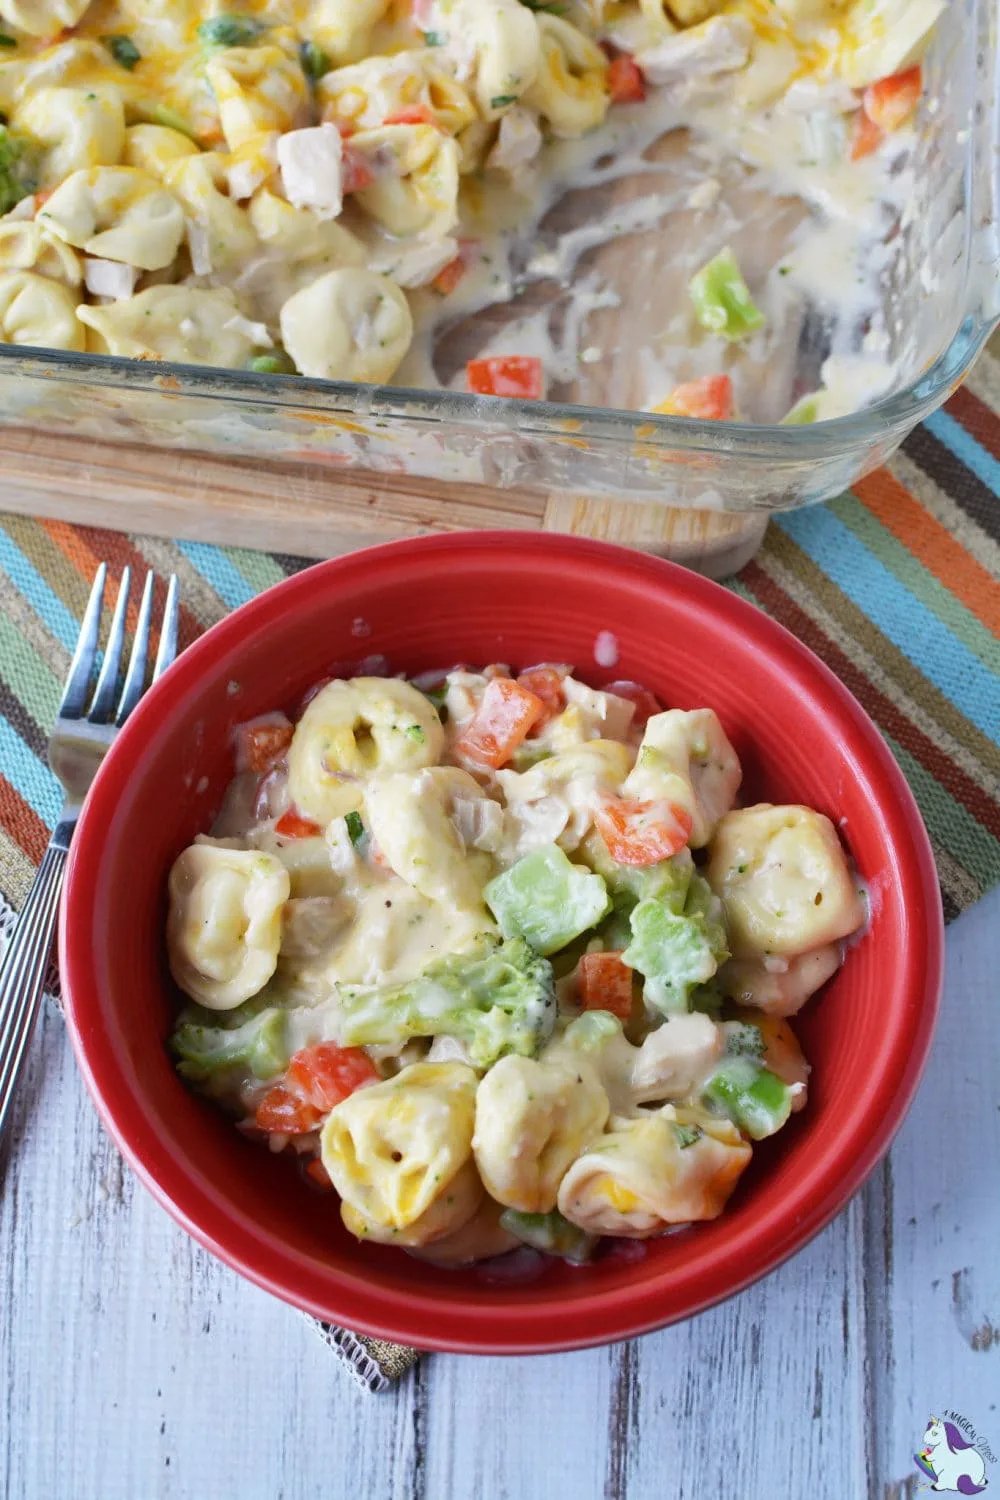 Chicken broccoli bake with tortellini in a red bowl